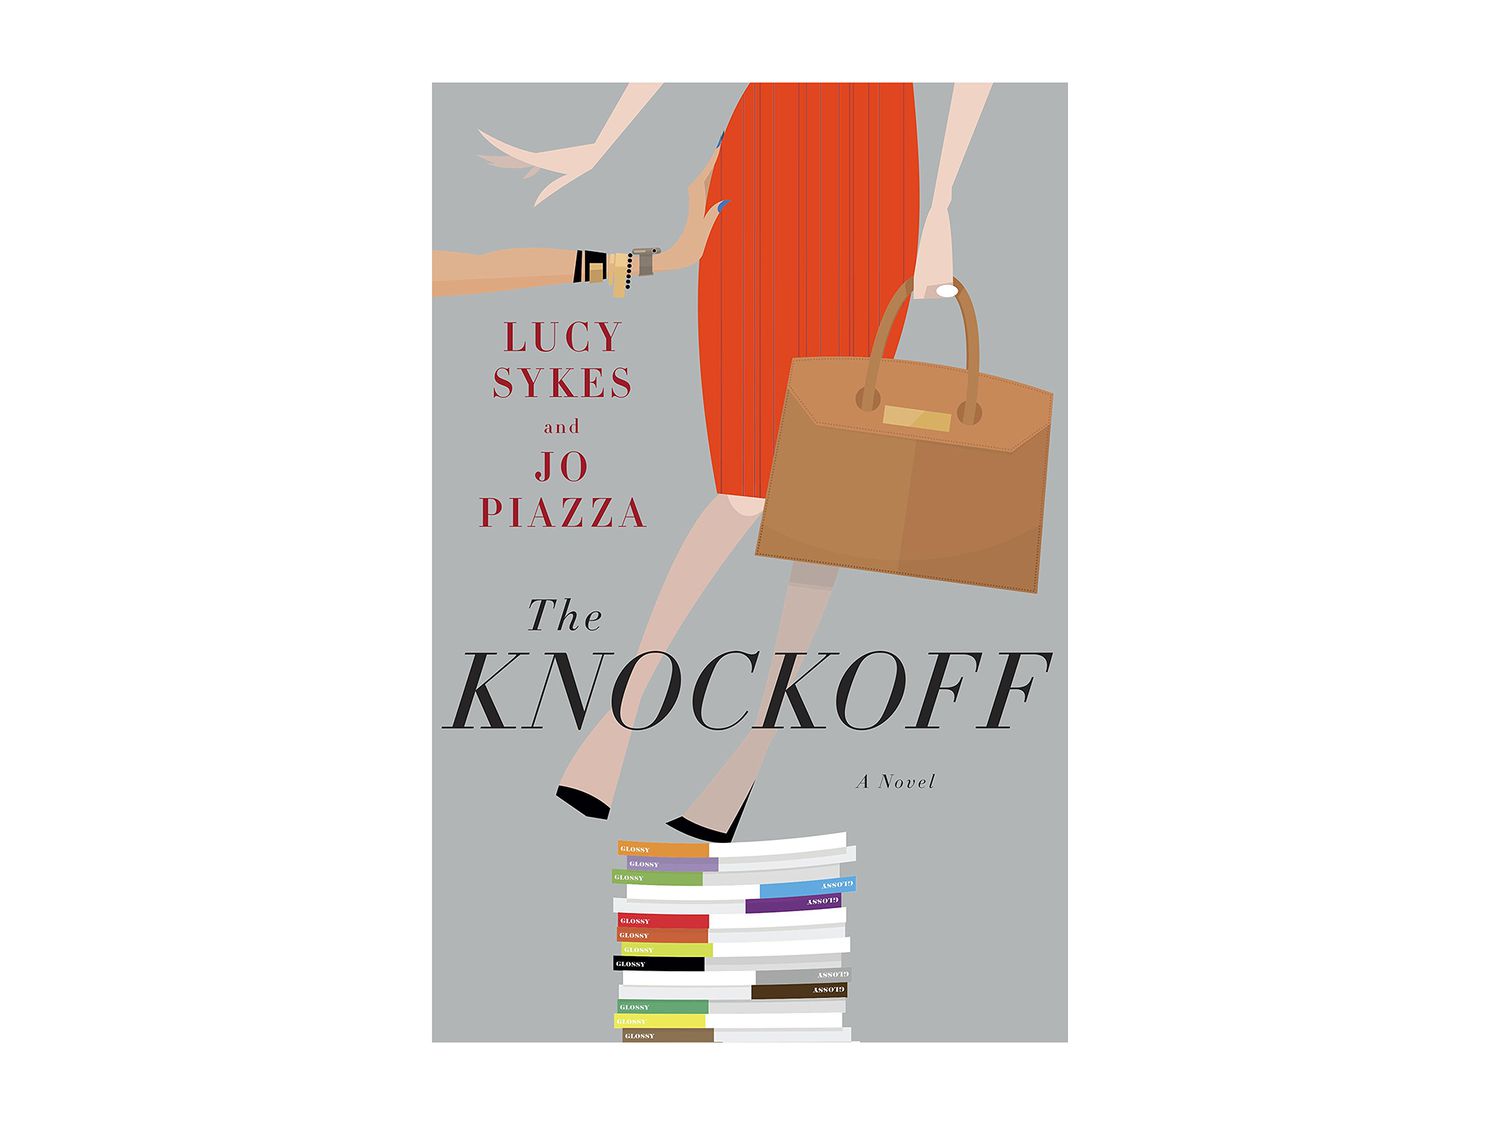 The Knockoff by Lucy Sykes and Jo Piazza